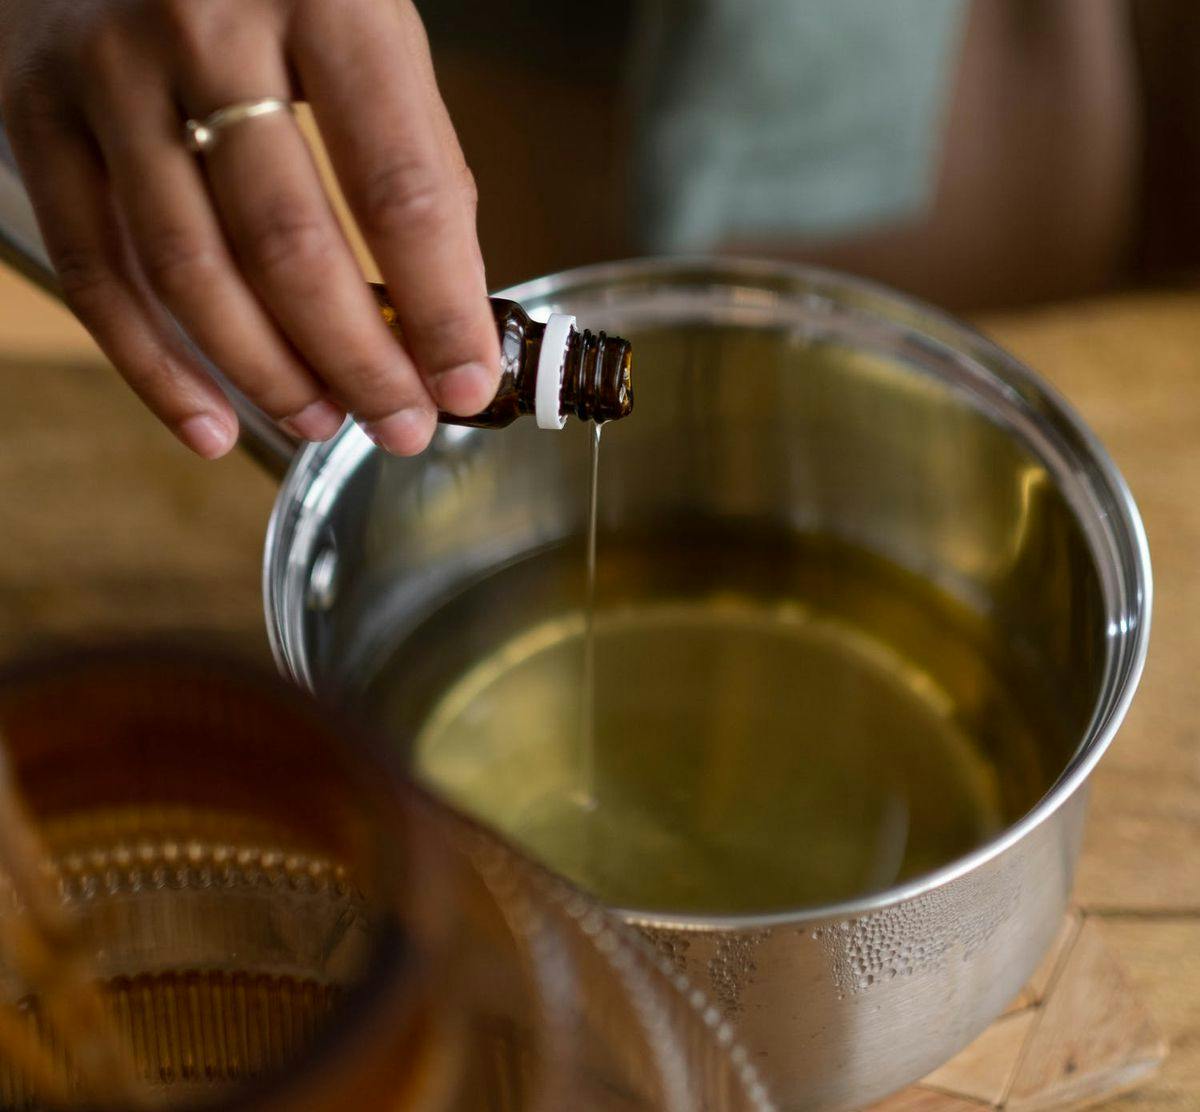 A hand pours a concentrate into a pot of oil for infusing, by Ron Lach via Pexels